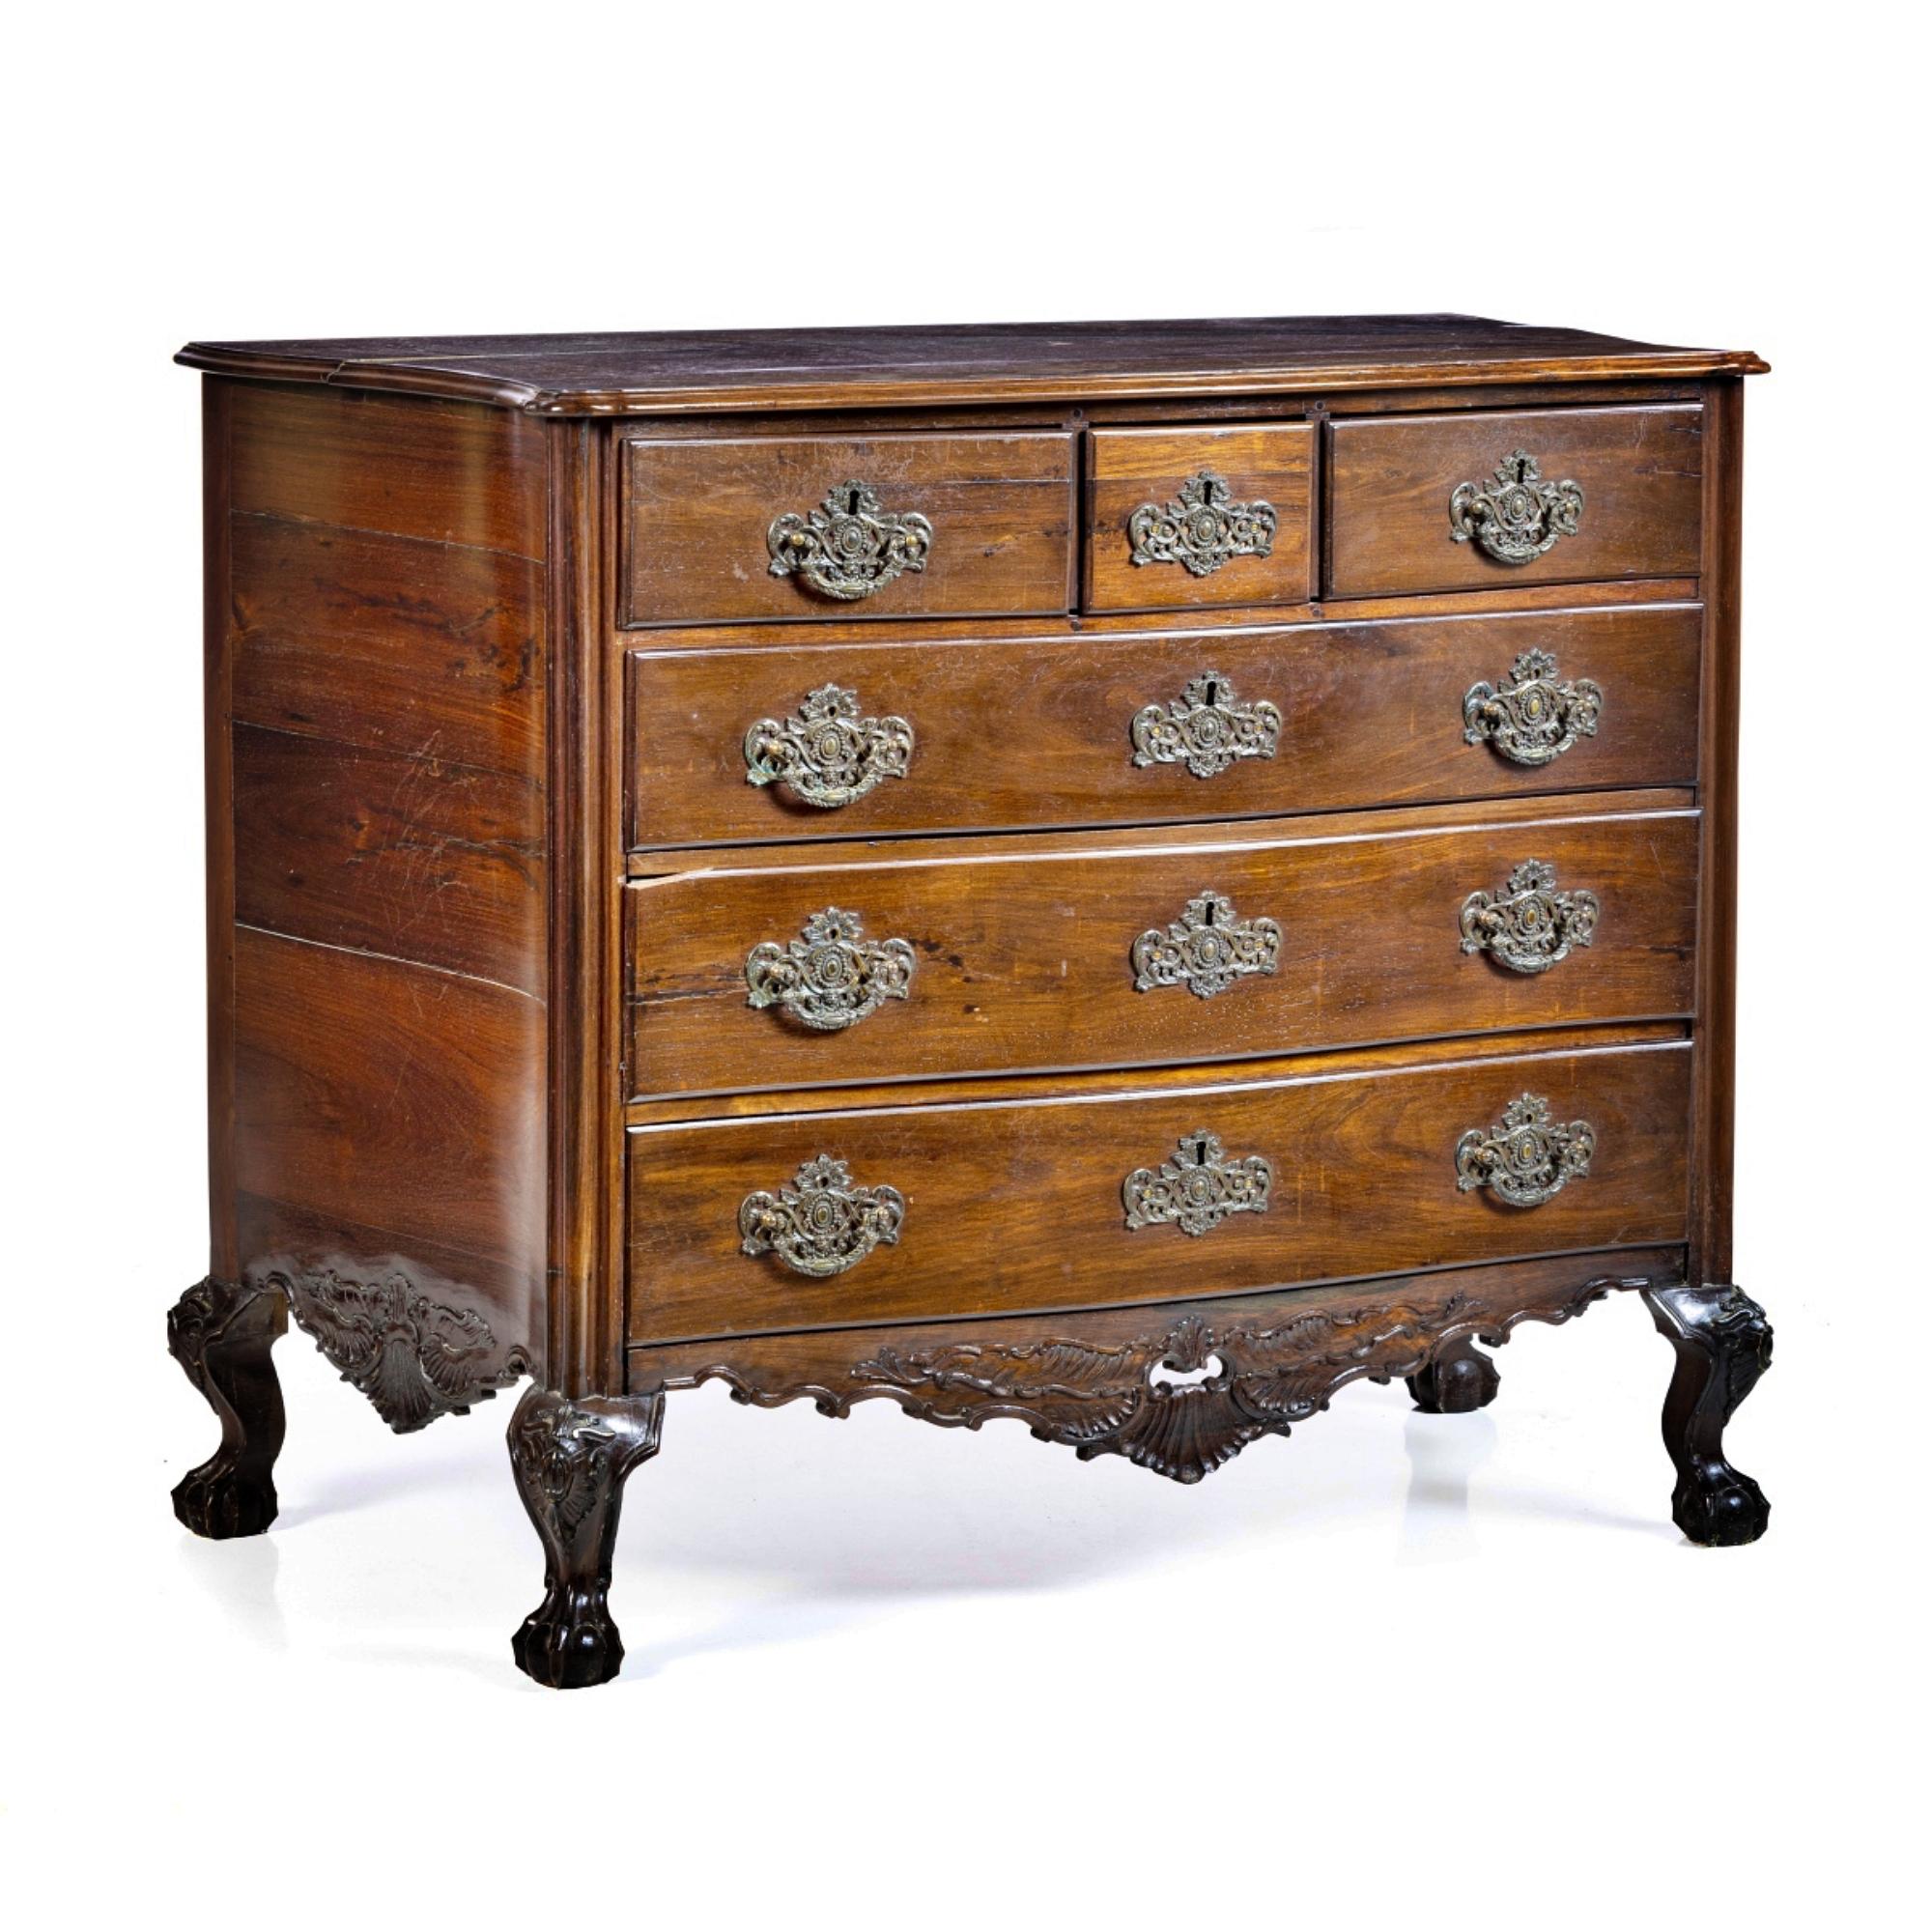 Portuguese IMPORTANT PORTUGUESE COMMODE D. JOÃO V 18th Century in ROSEWOOD For Sale